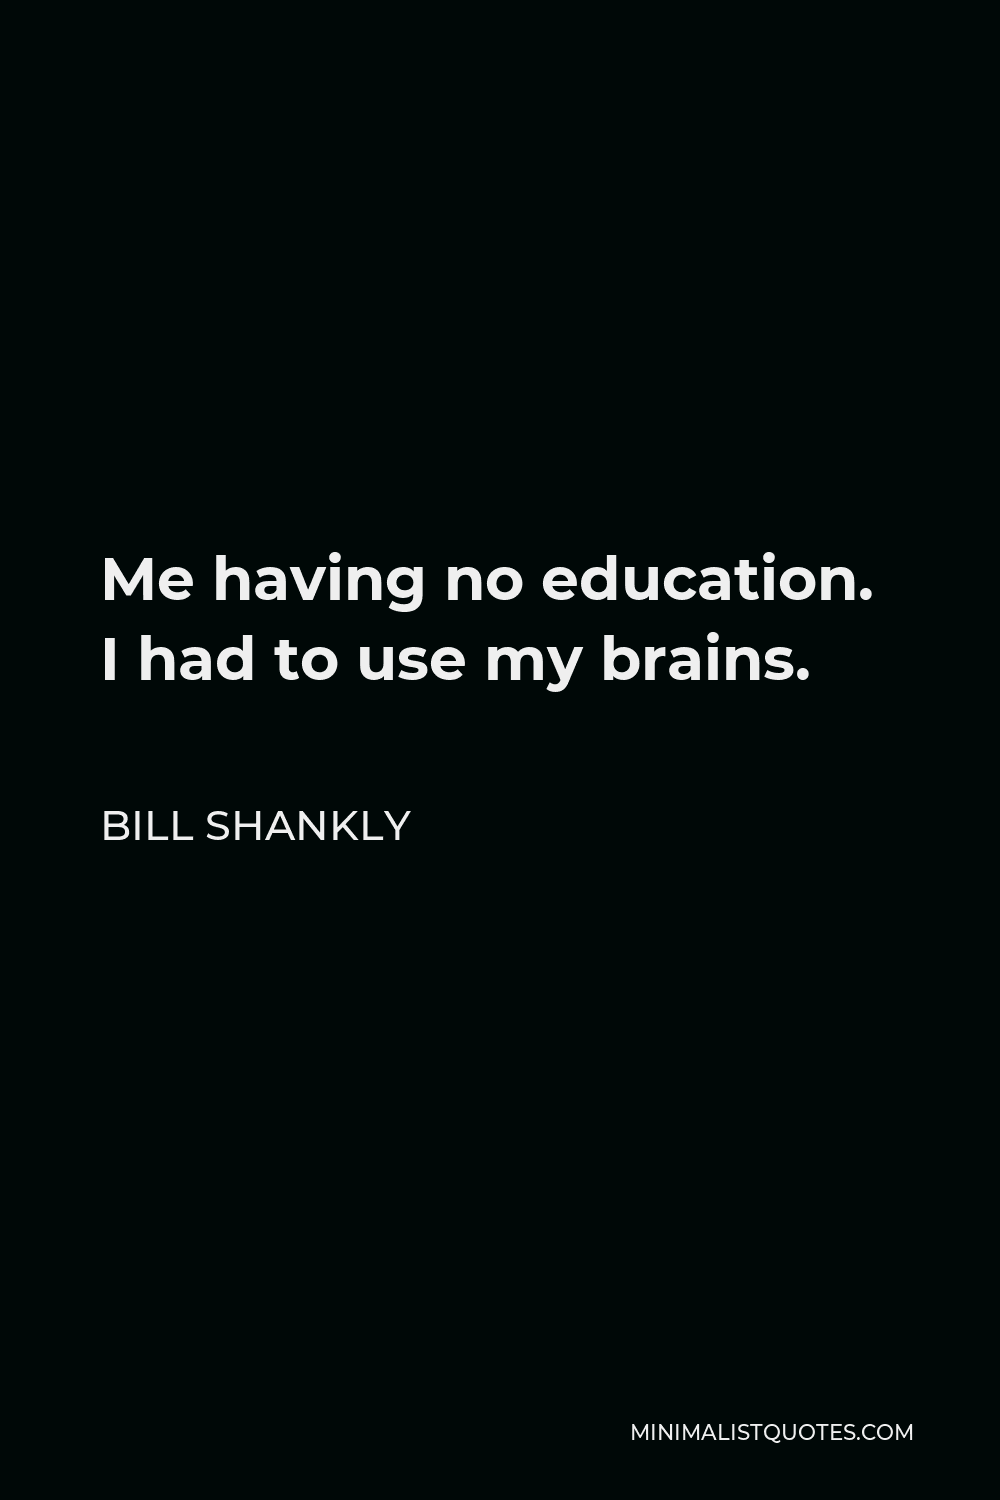 Bill Shankly Quote - Me having no education. I had to use my brains.